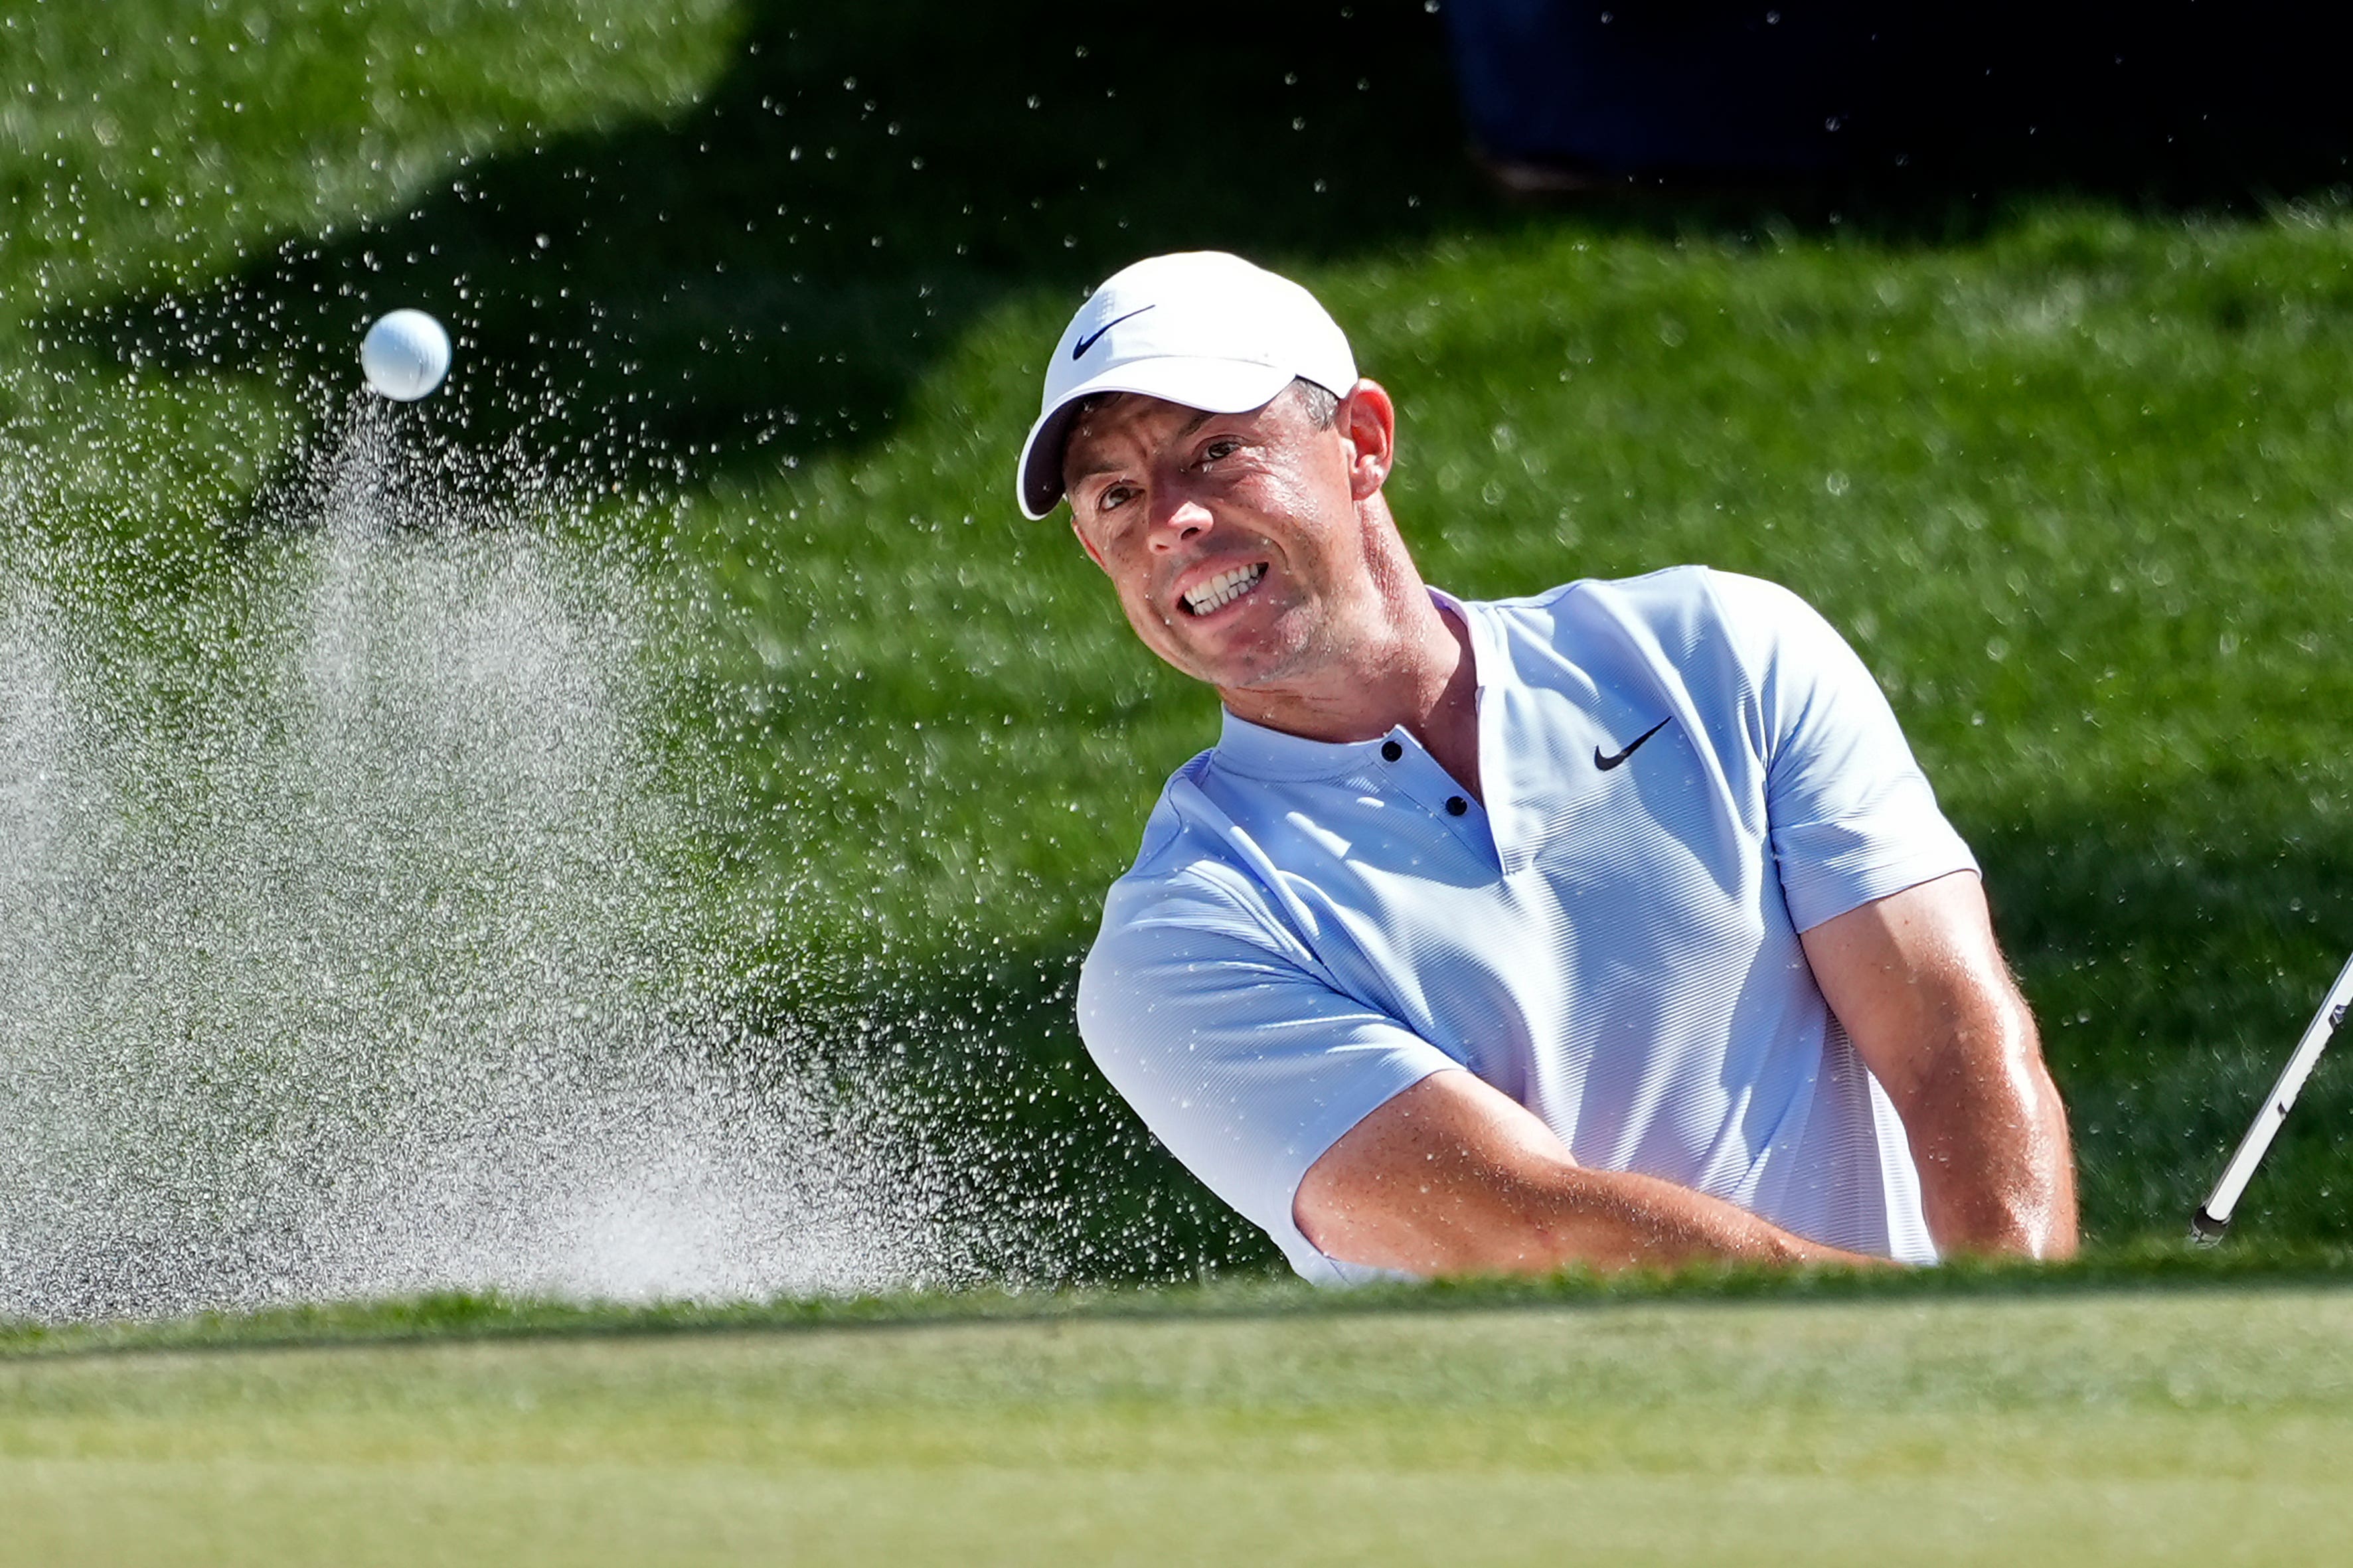 Rory McIlroy is trying to win the Masters for the first time to complete a career grand slam